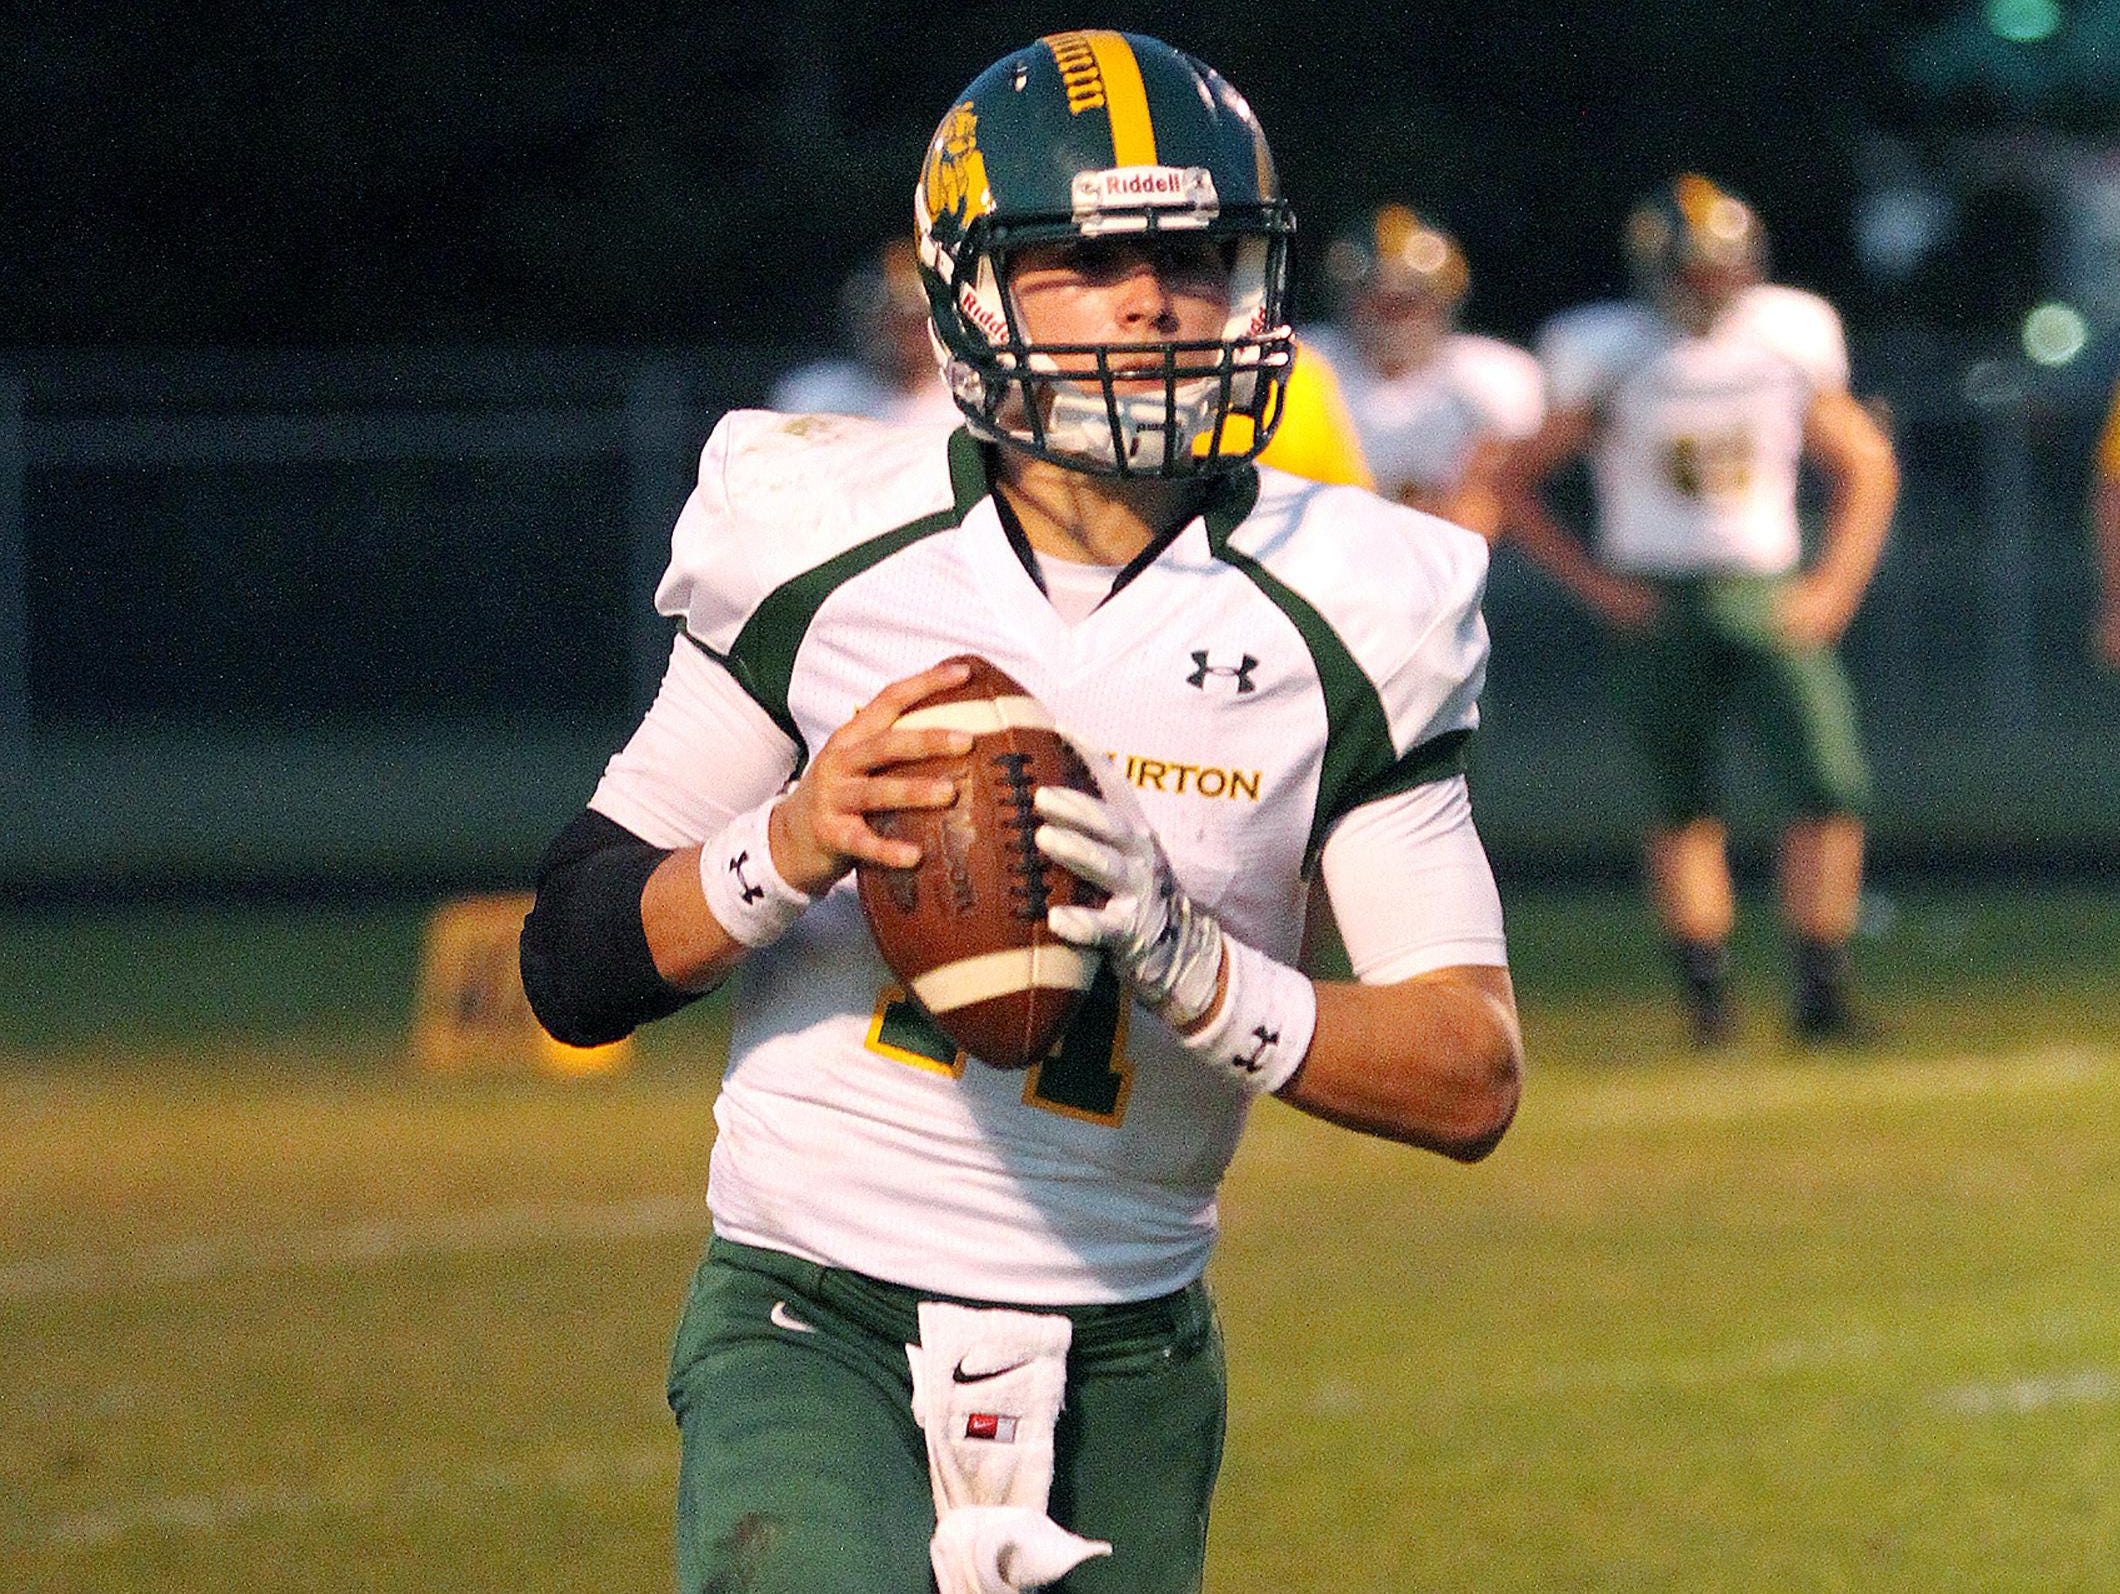 Burr and Burton quarterback Griff Stalcup rolls out of the pocket during a Week 3 football game against Milton.